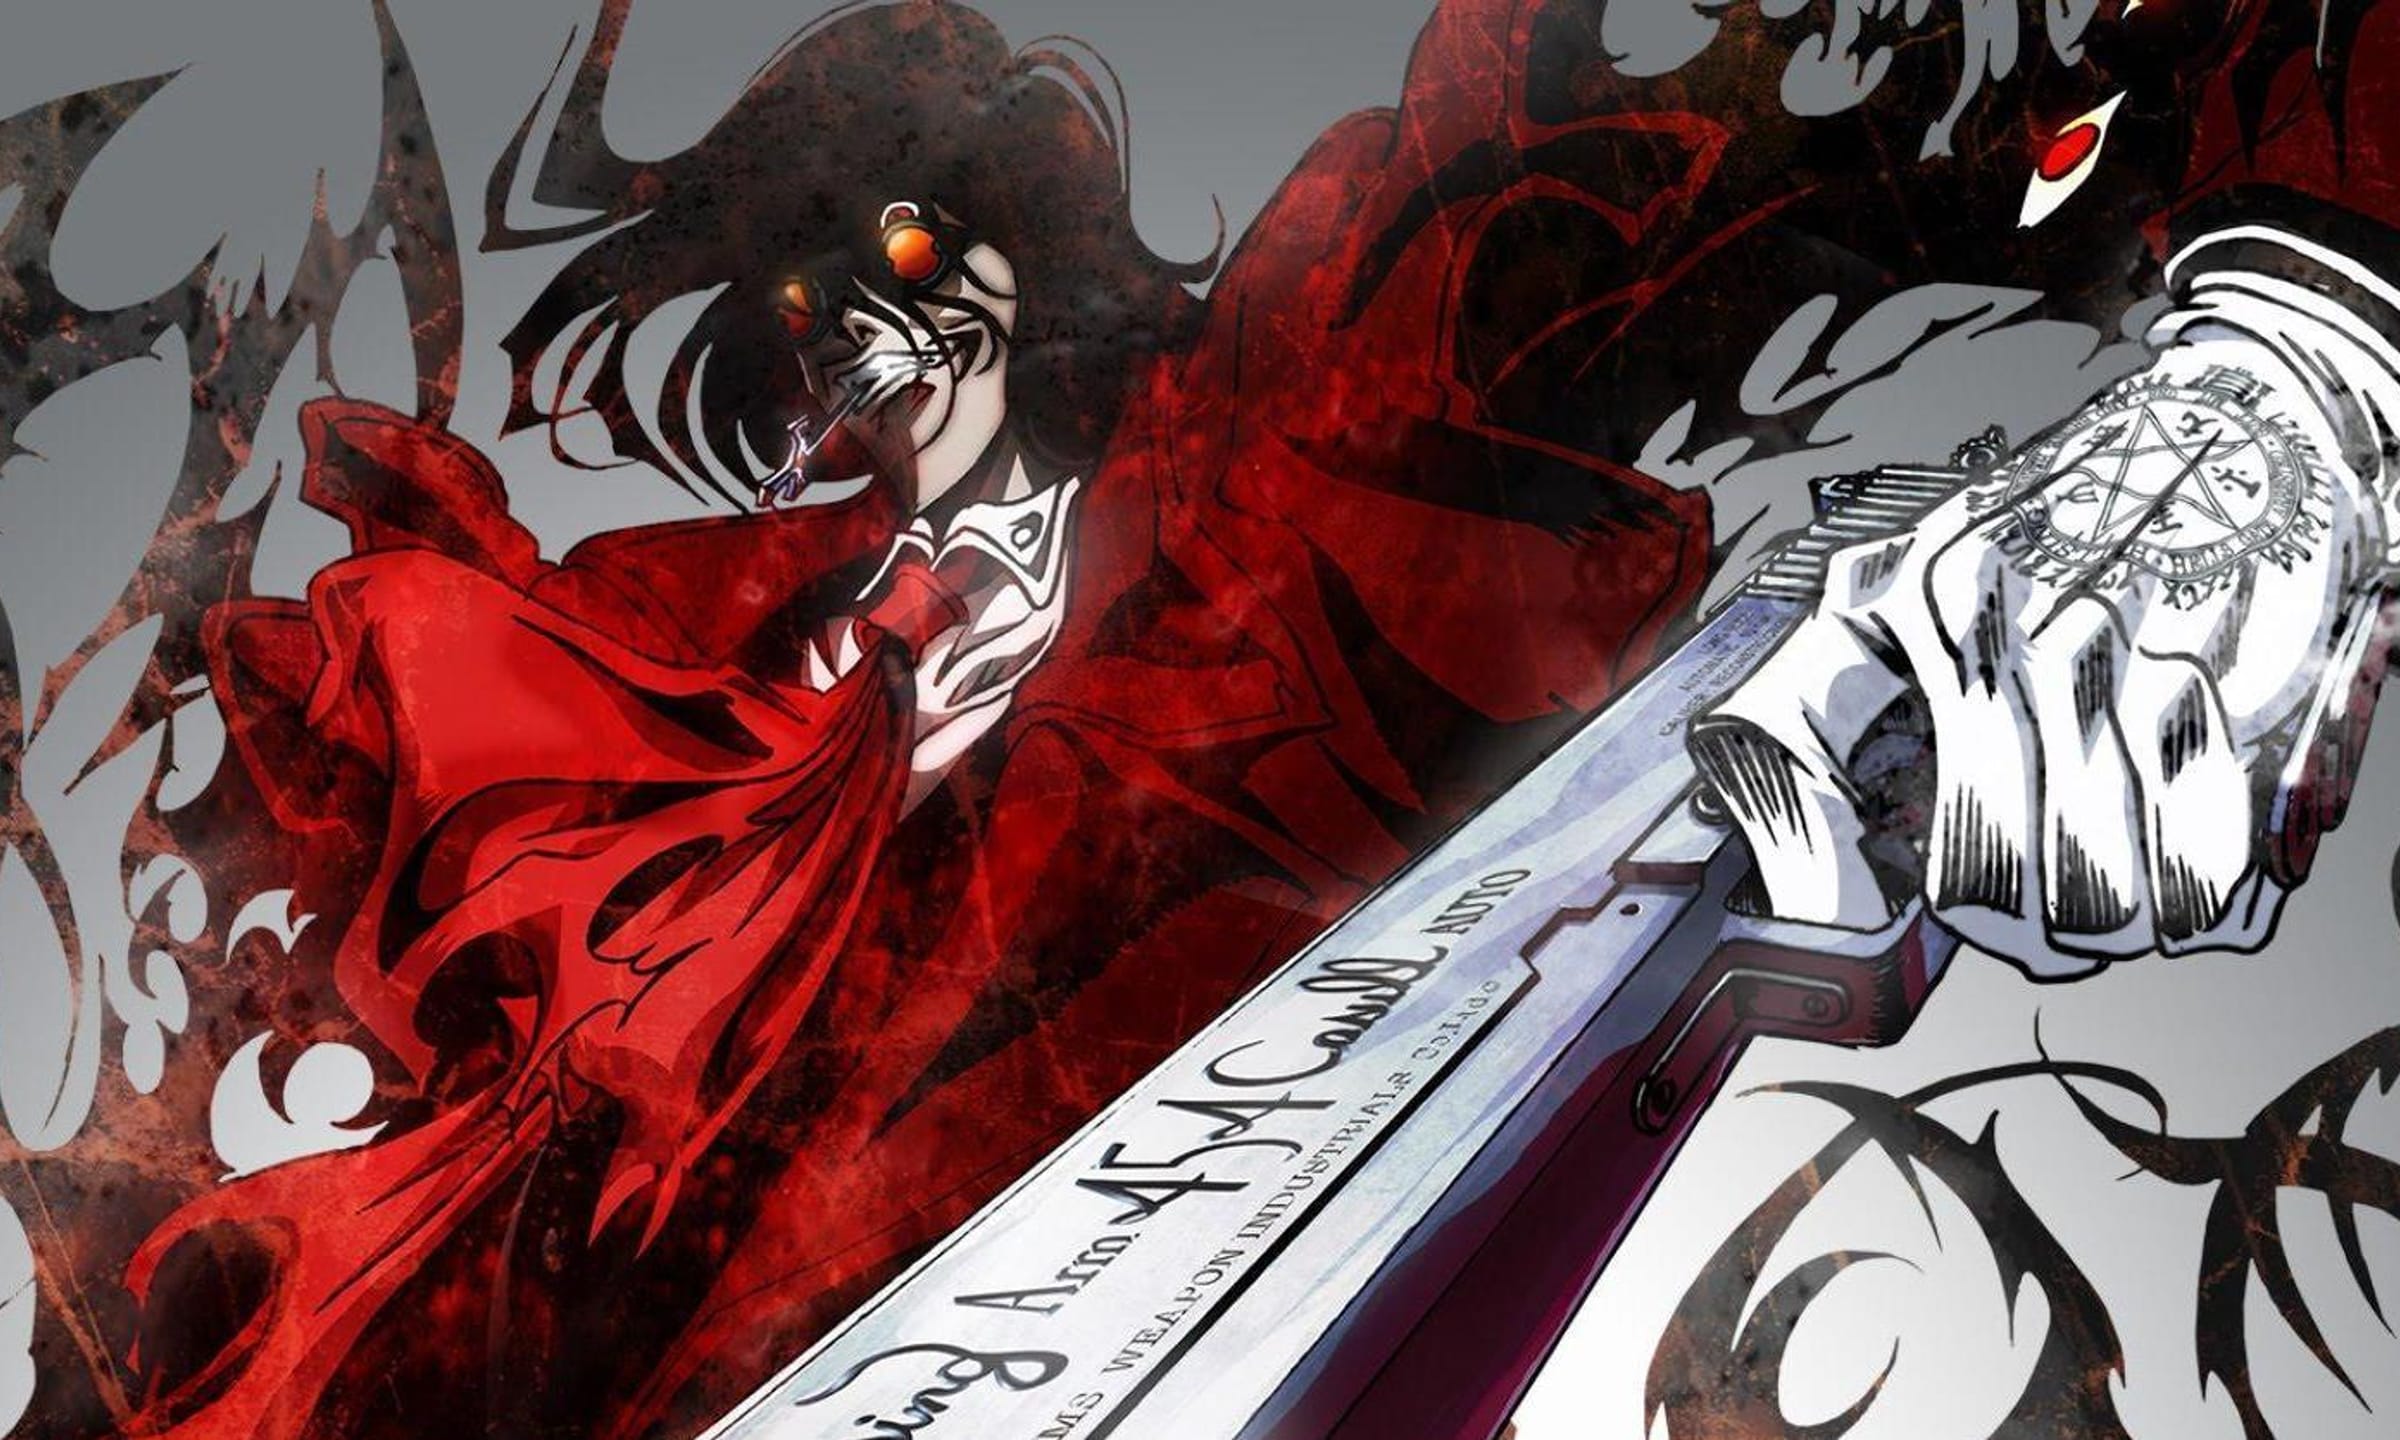 Best Vampire Anime  List of Top Anime About Vampires